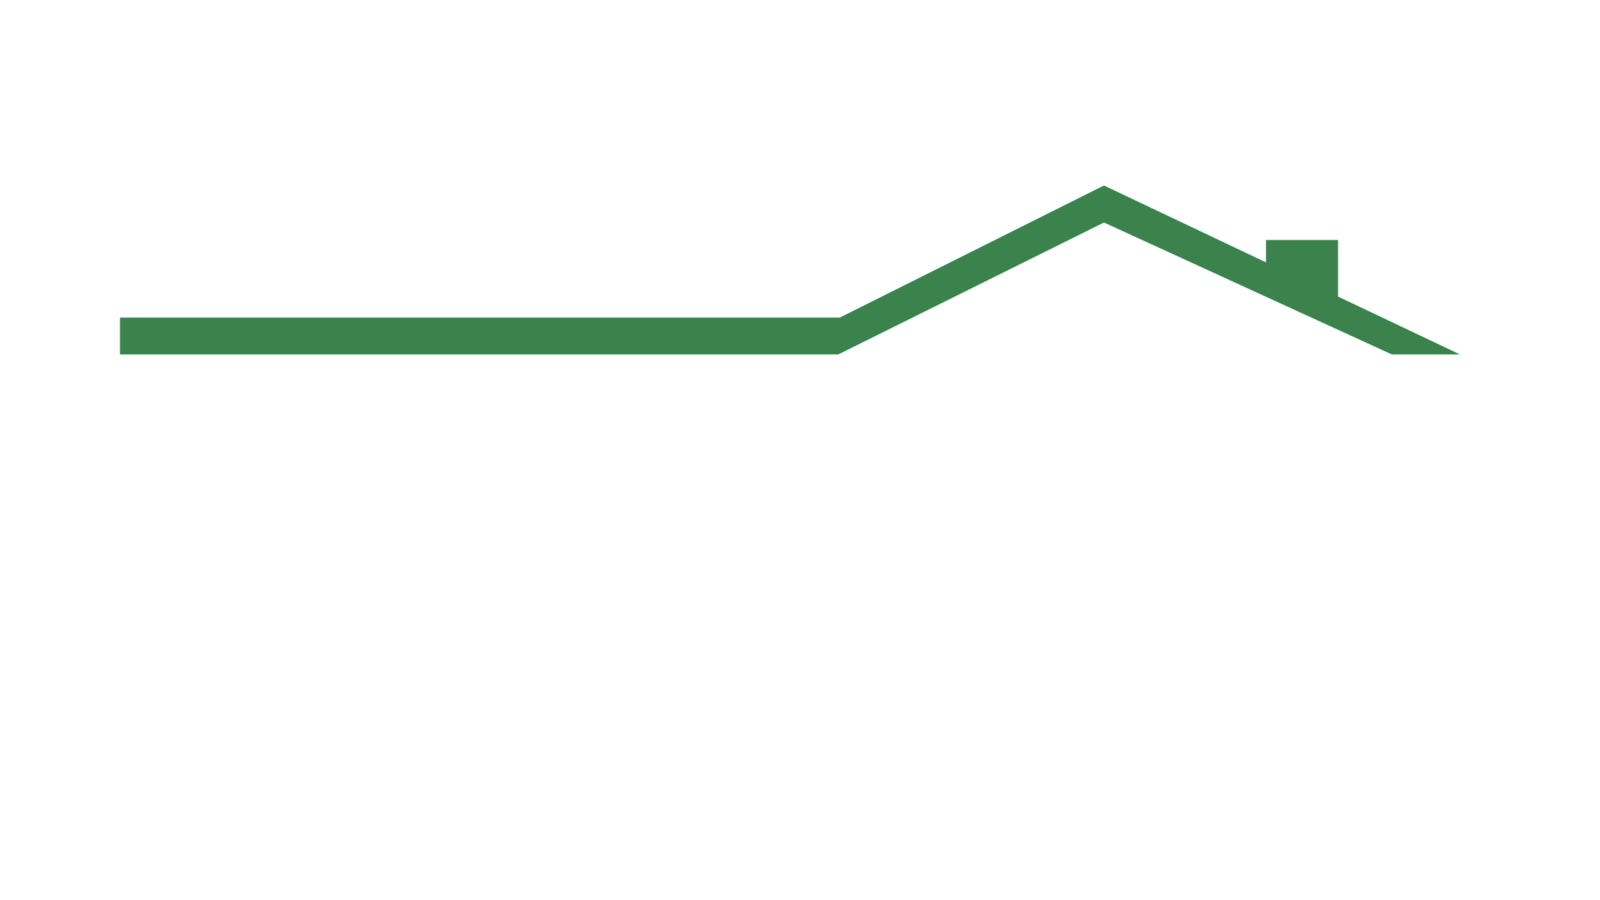 Commercial & Residential